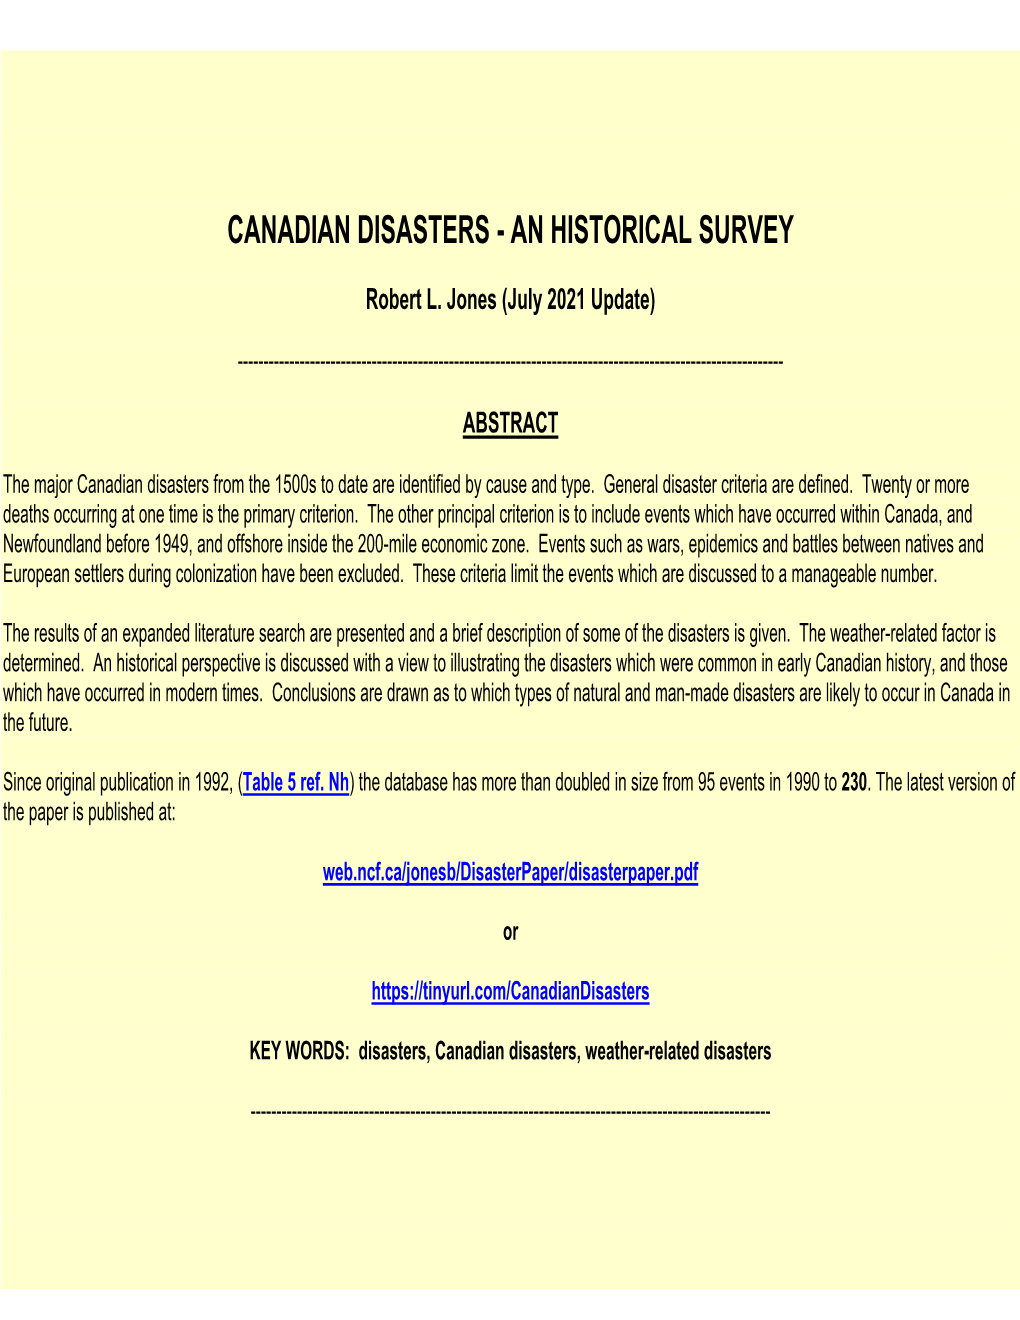 Canadian Disasters - an Historical Survey